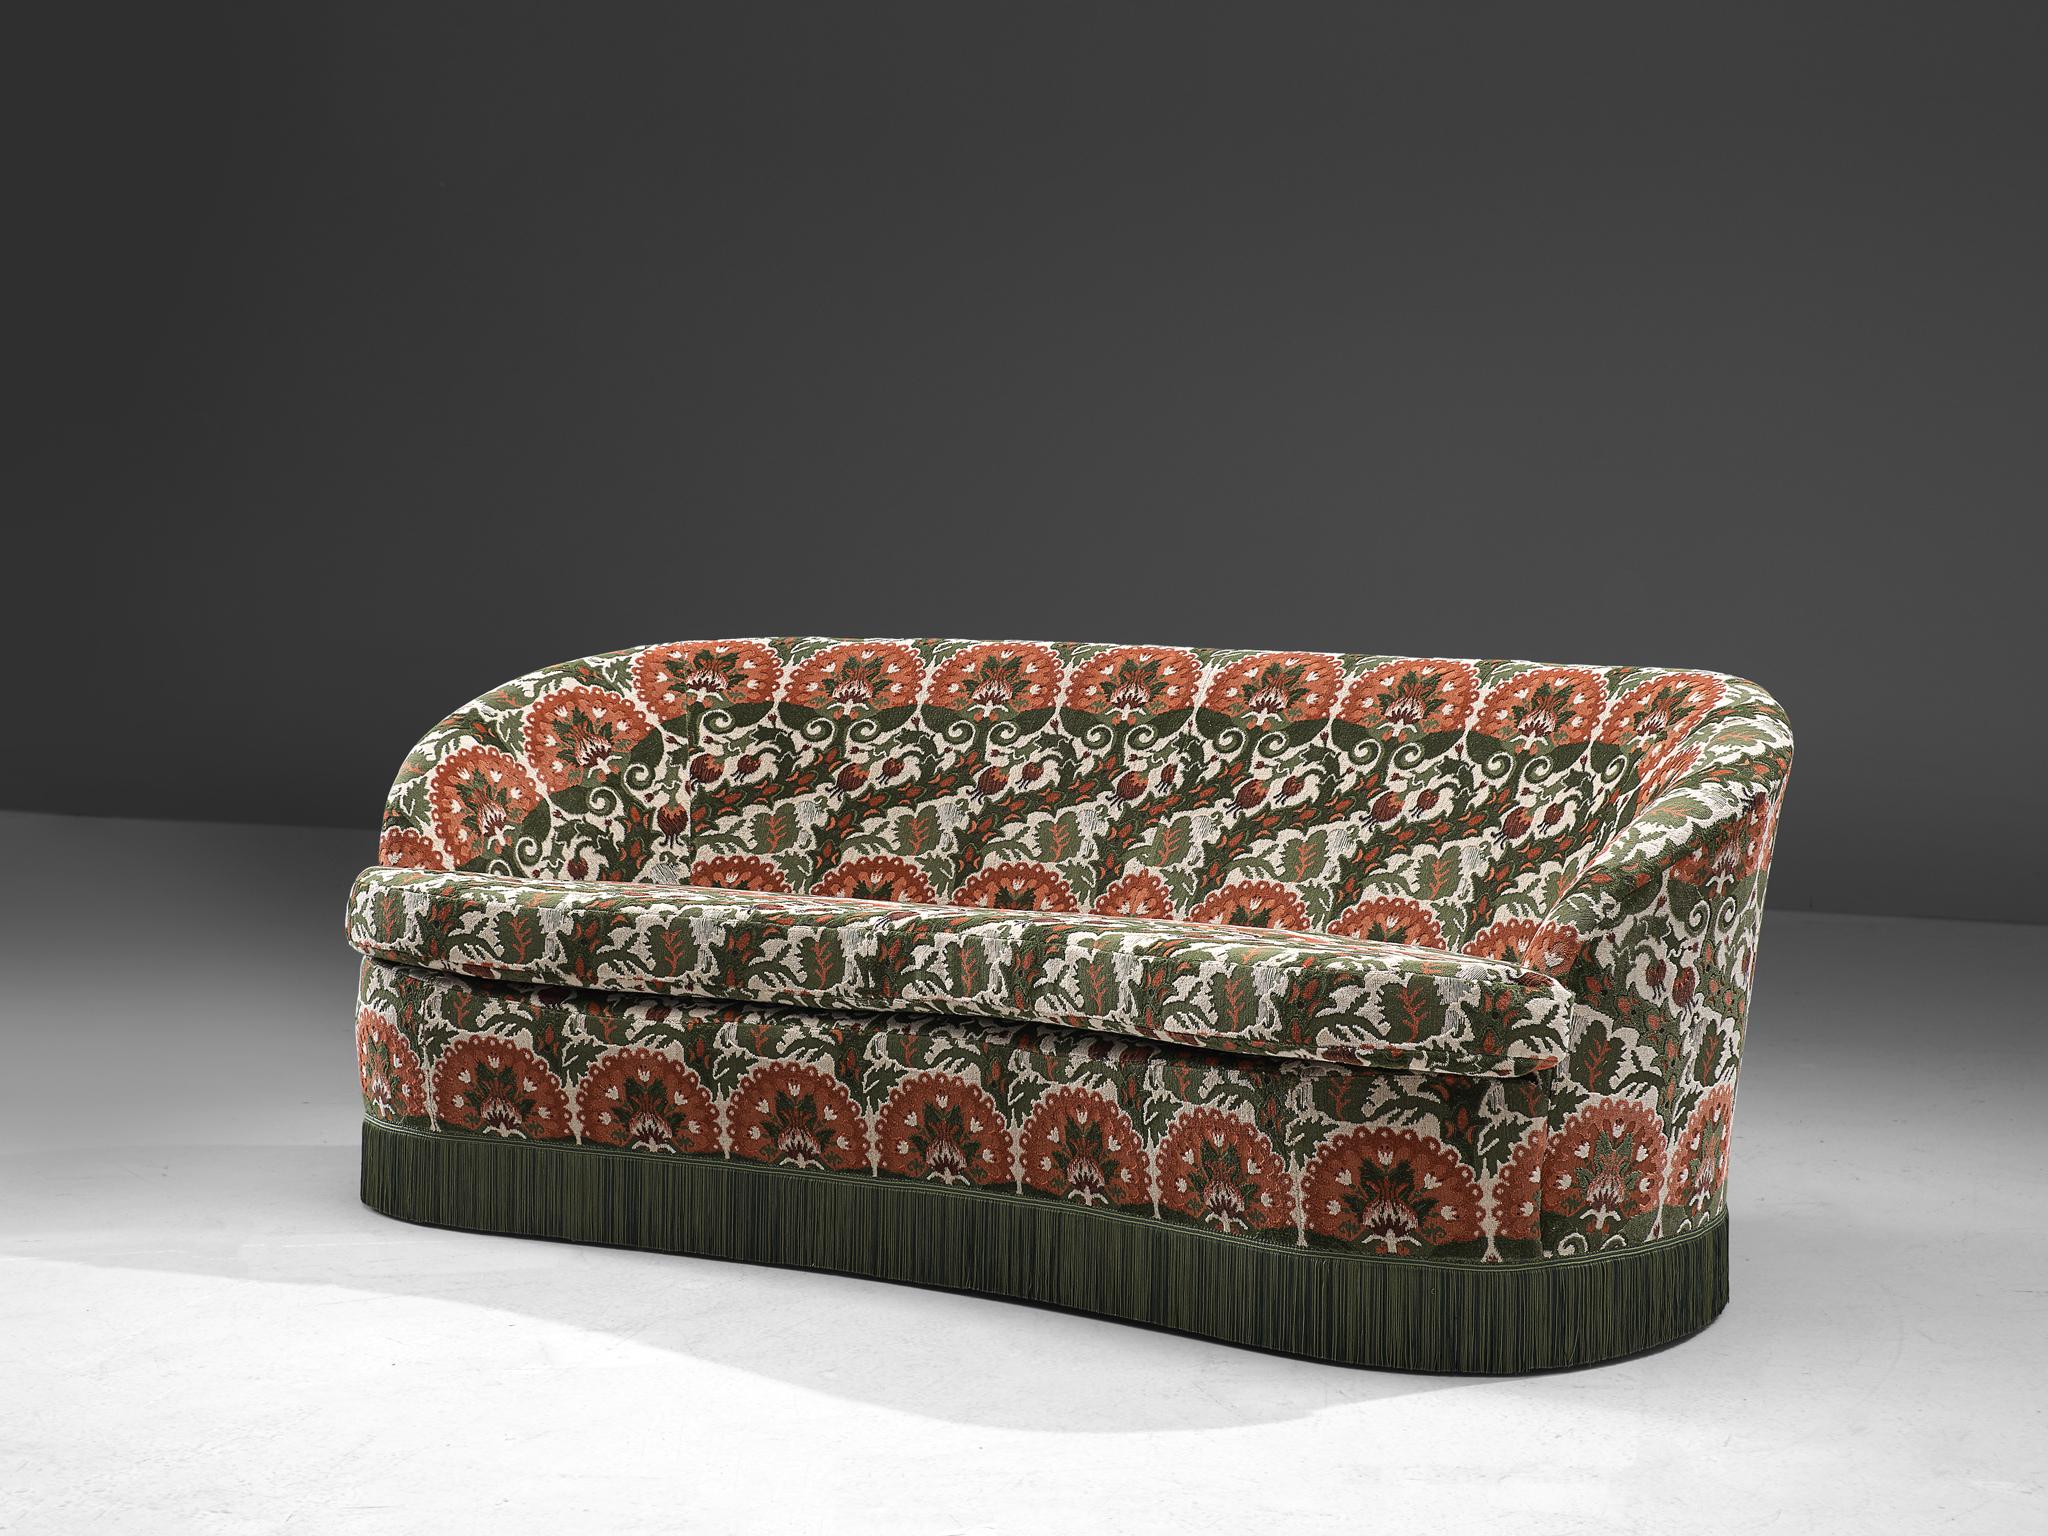 In the manner of Gio Ponti, three-seat sofa, floral fabric and wood, Italy, 1940s.

Elegant and feminine sofa designed in the style and time of Gio Ponti with a richly colored upholstery and a Classic green skirt. This sofa features a curved, high